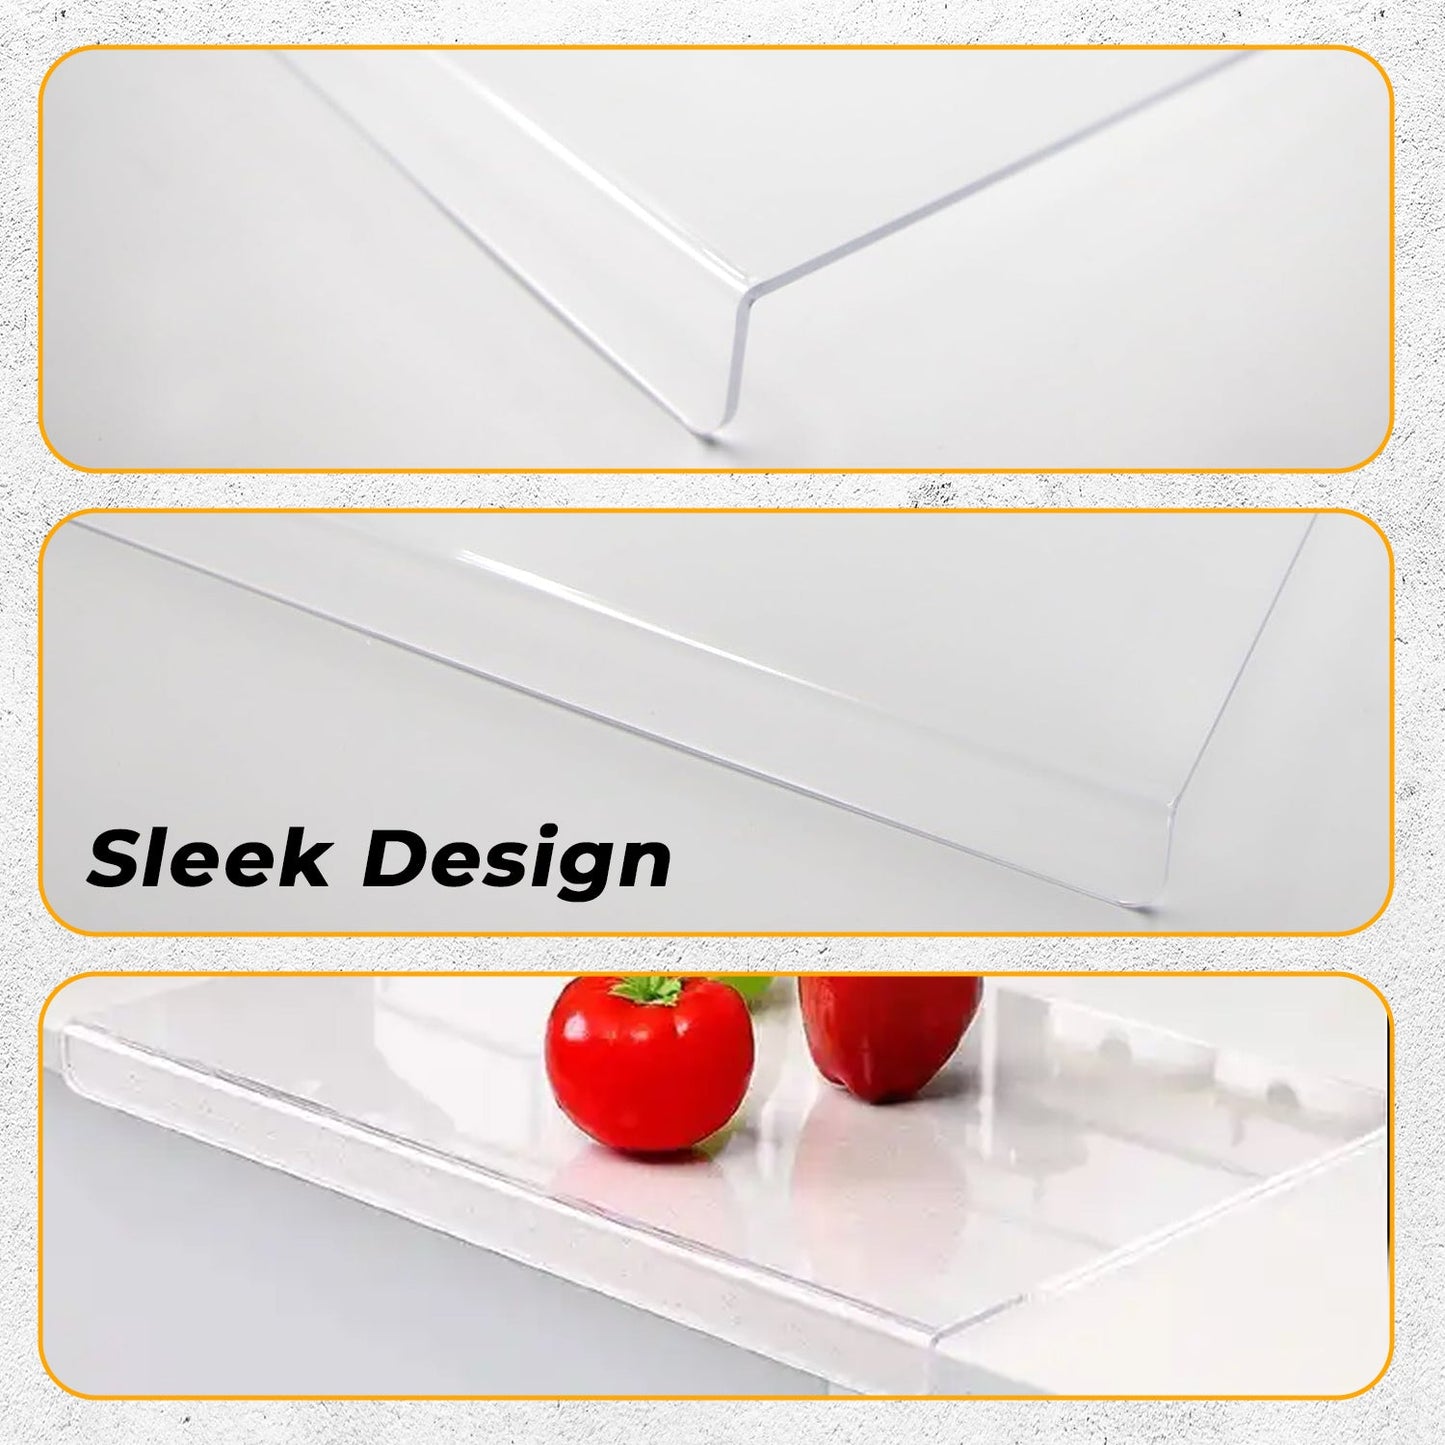 45x35 cm Acrylic Clear Cutting Board with Counter Lip for Kitchen Countertop Non Slip, Upgraded Thicker Large Cutting Board for Countertop Protector